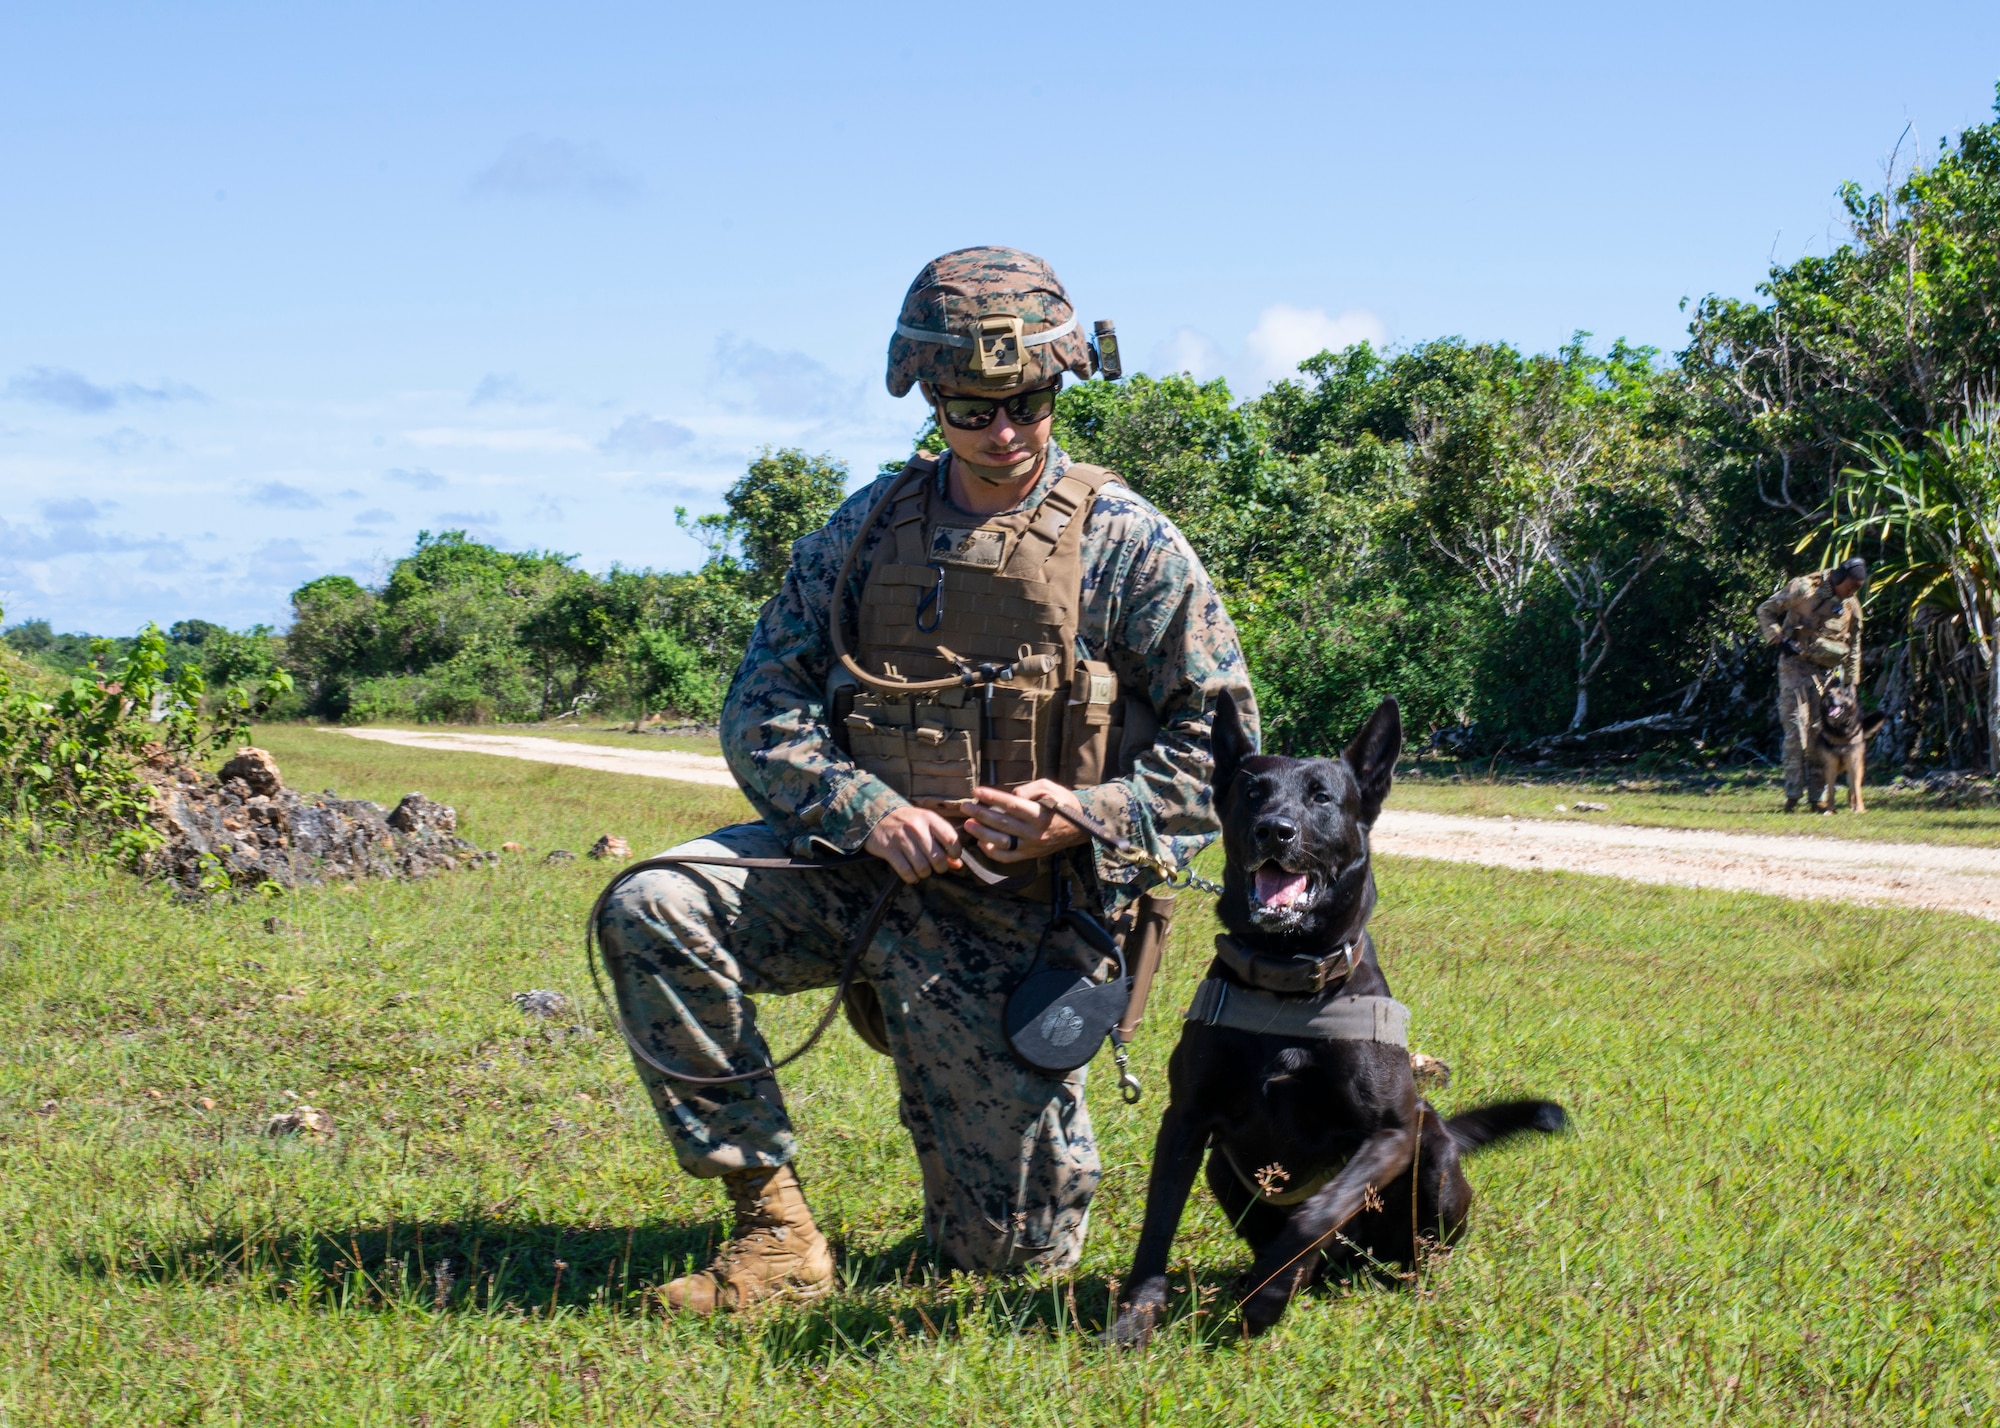 Sgt. Chase McConnell, 3rd Law Enforcement Battallion, keeps Duece calm during a pyro exercise to help military working dogs get used to the sounds of combat on Andersen Air Force Base, Guam Nov. 20. Marines and Airmen exchanged MWD techiques to enhance joint mission effectivness. (U.S. Air Force photo by Staff Sgt. Nicholas Crisp)